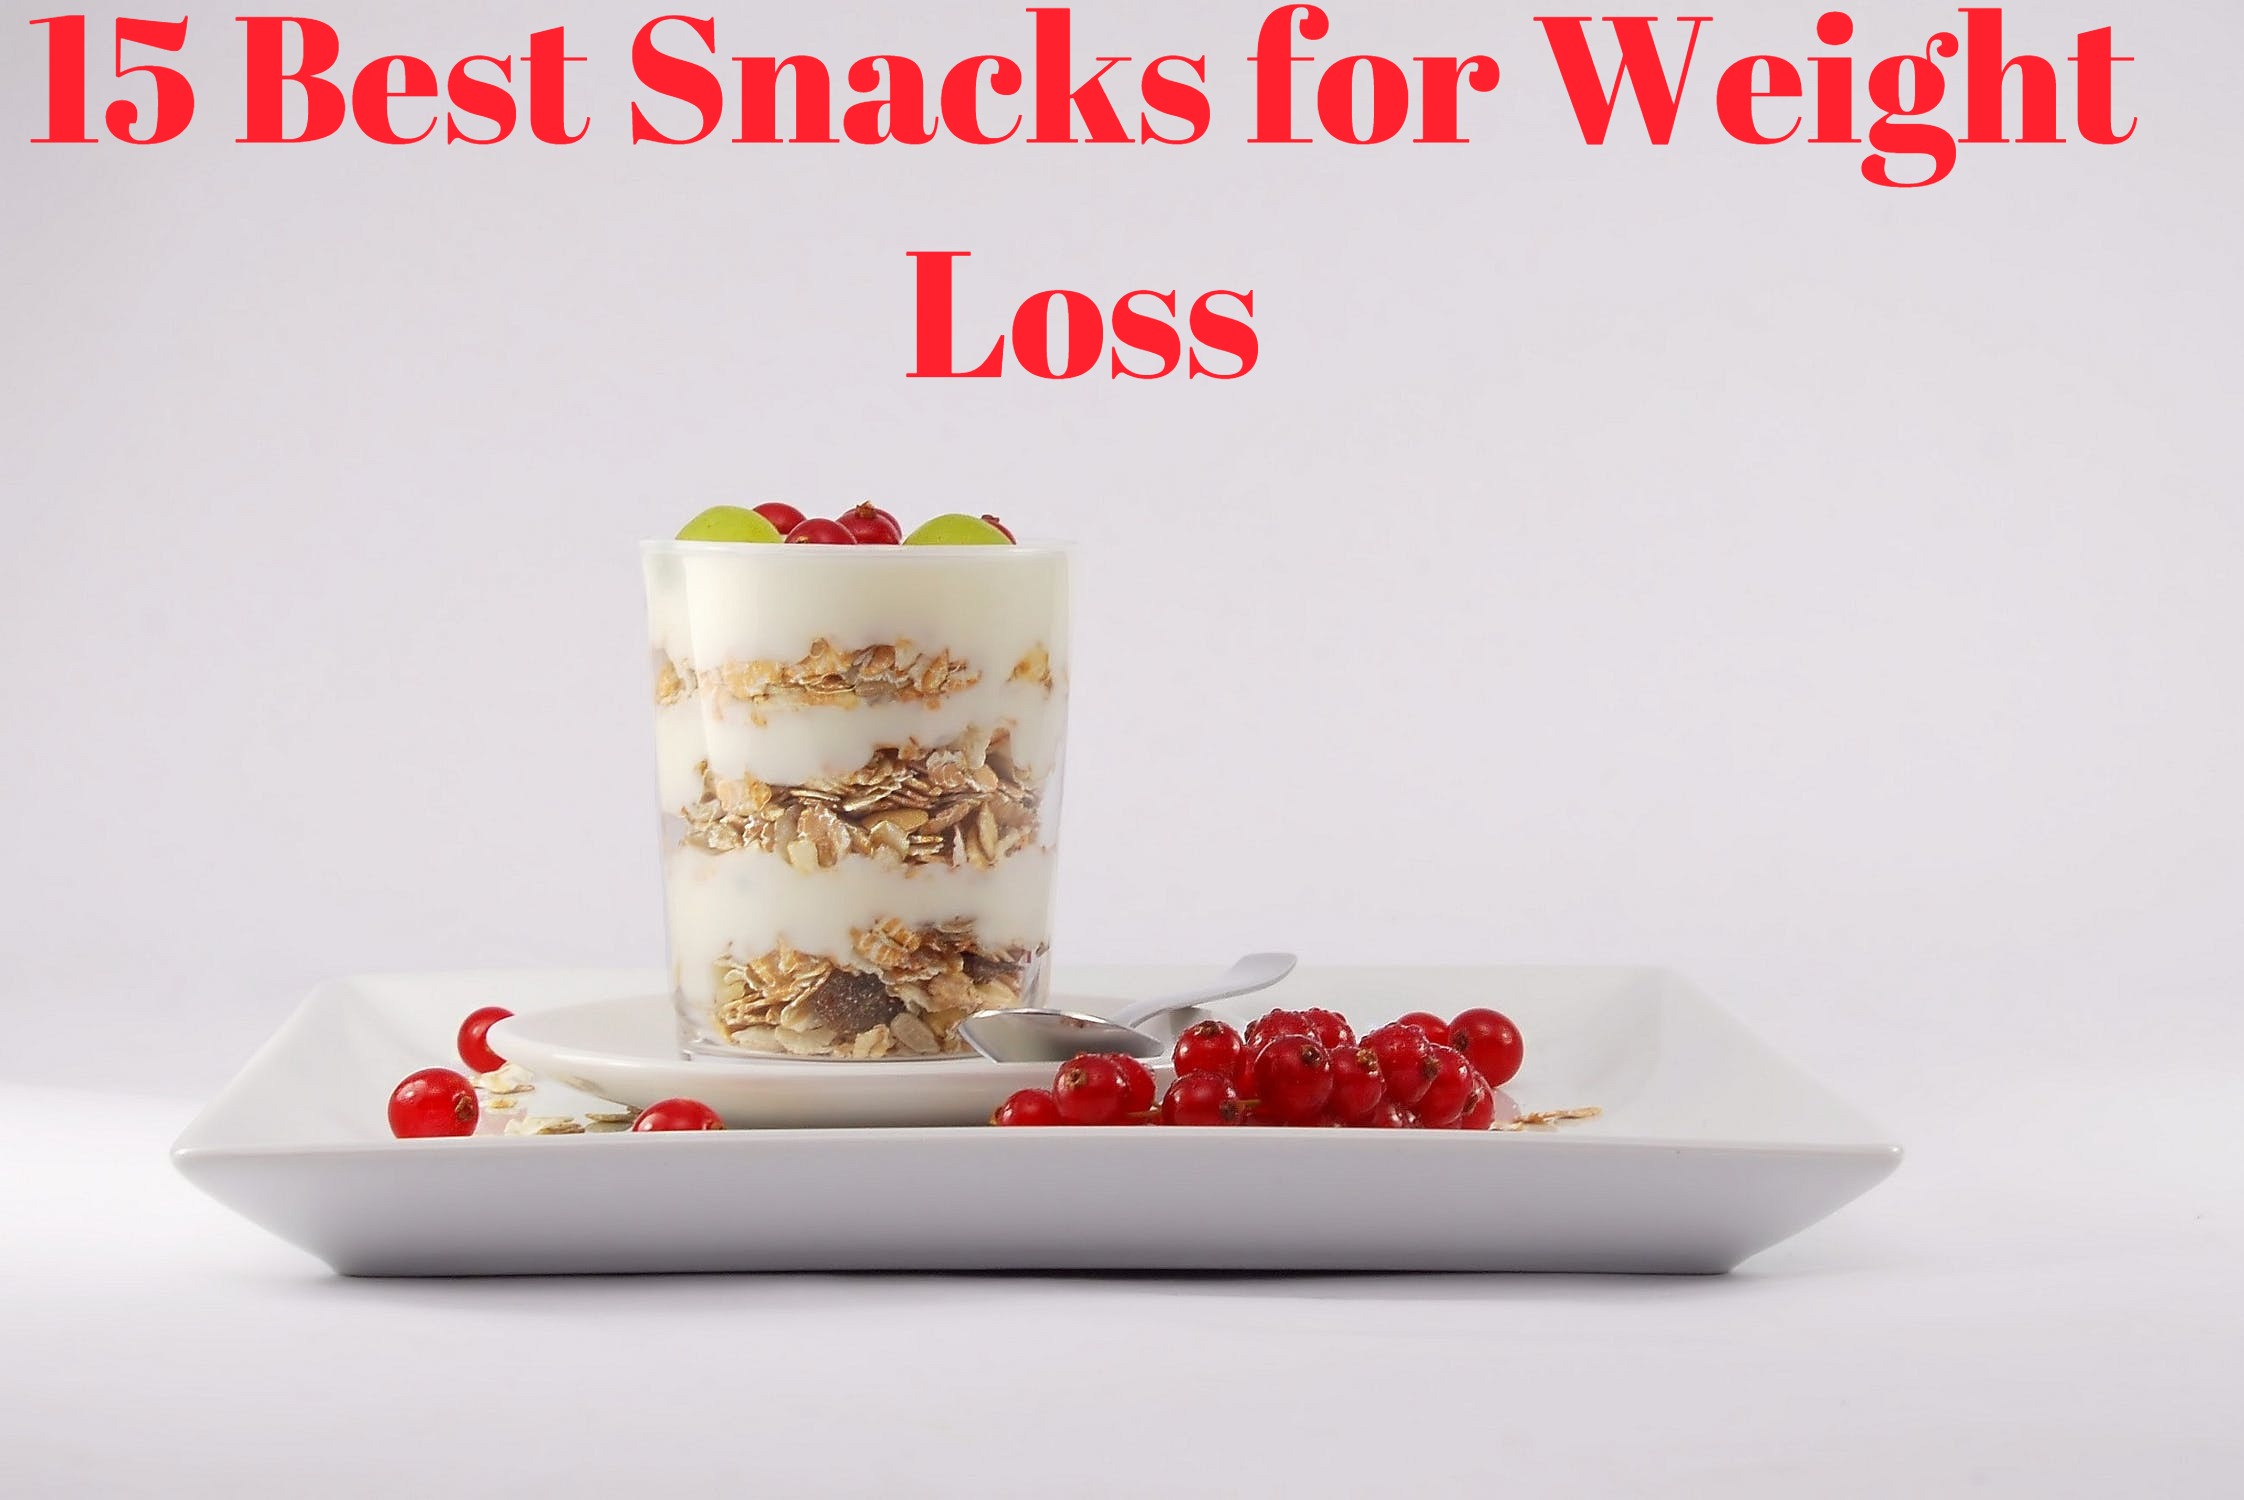 Snacks for Weight Loss